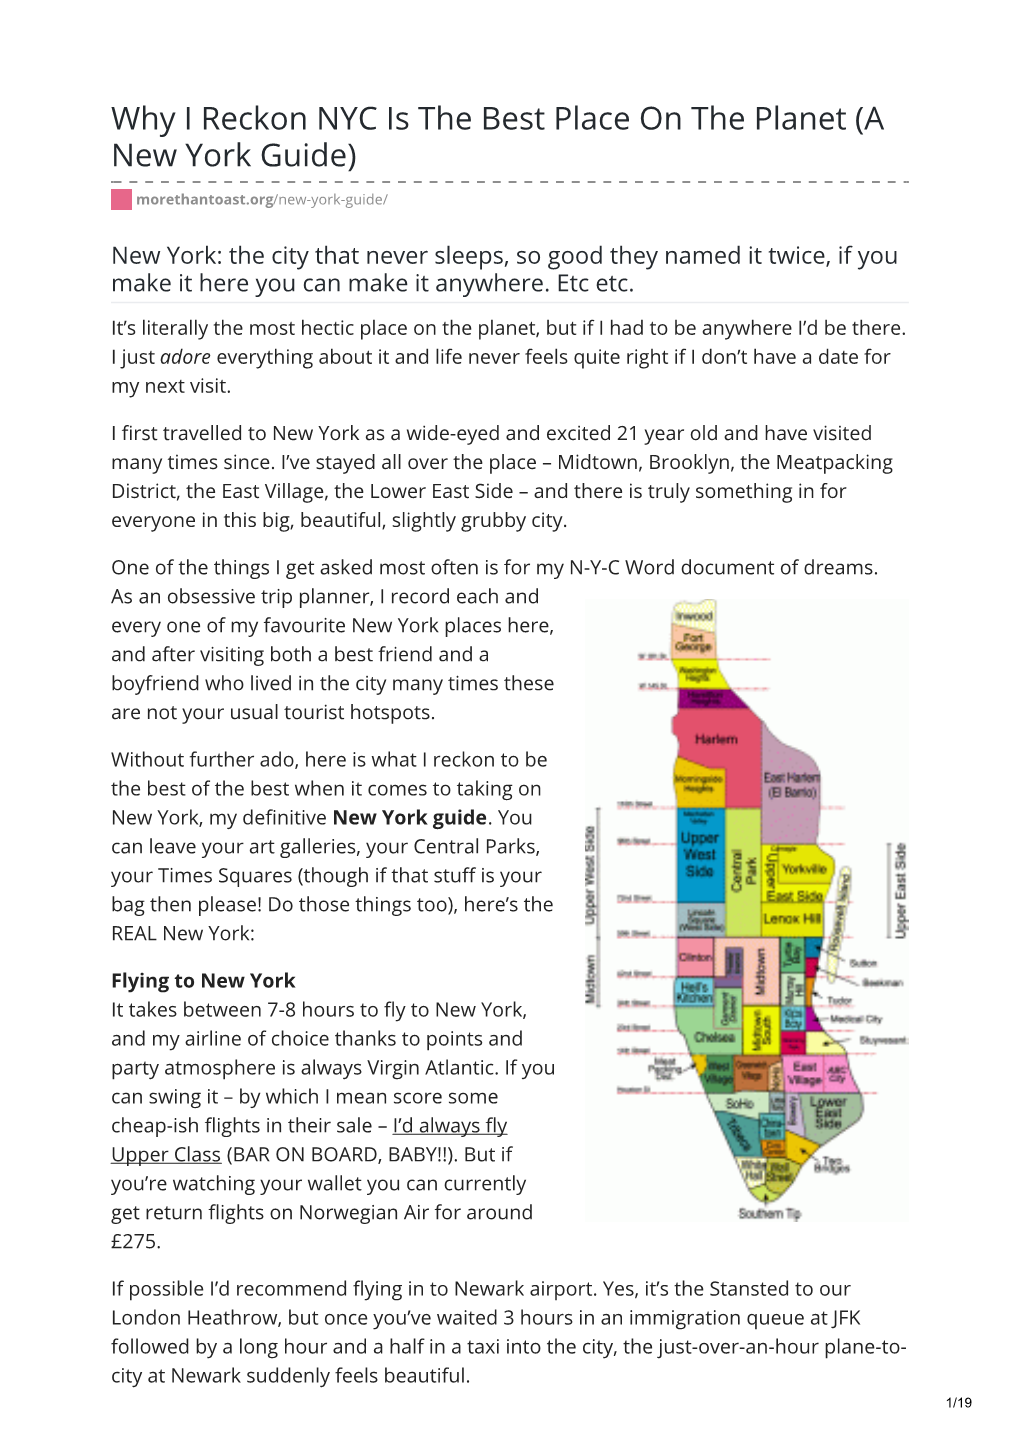 Why I Reckon NYC Is the Best Place on the Planet (A New York Guide)